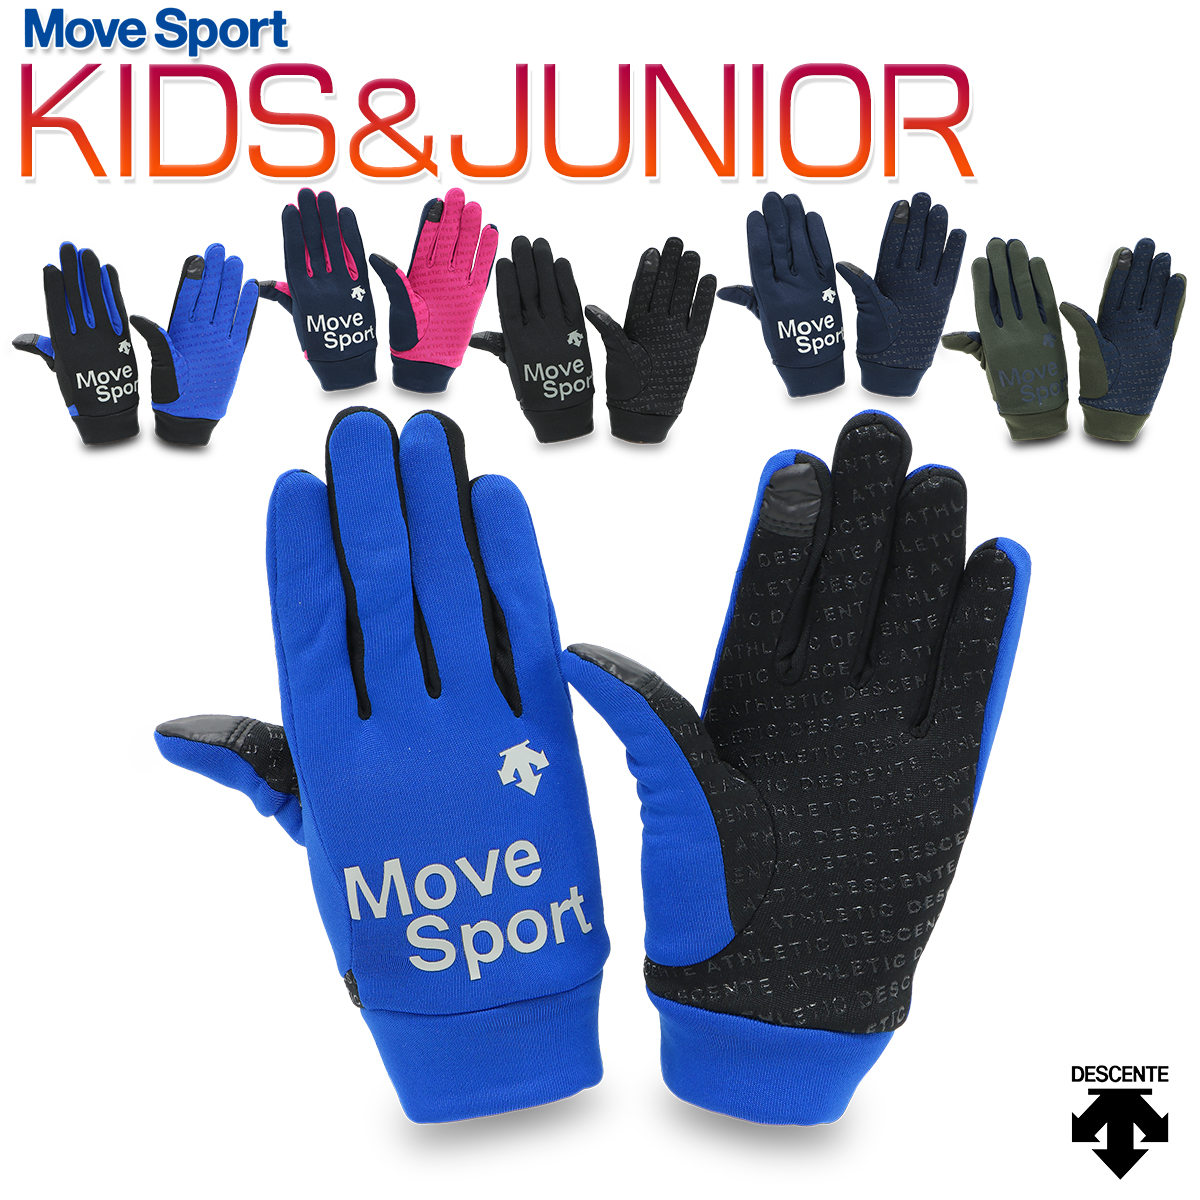 black and blue football gloves